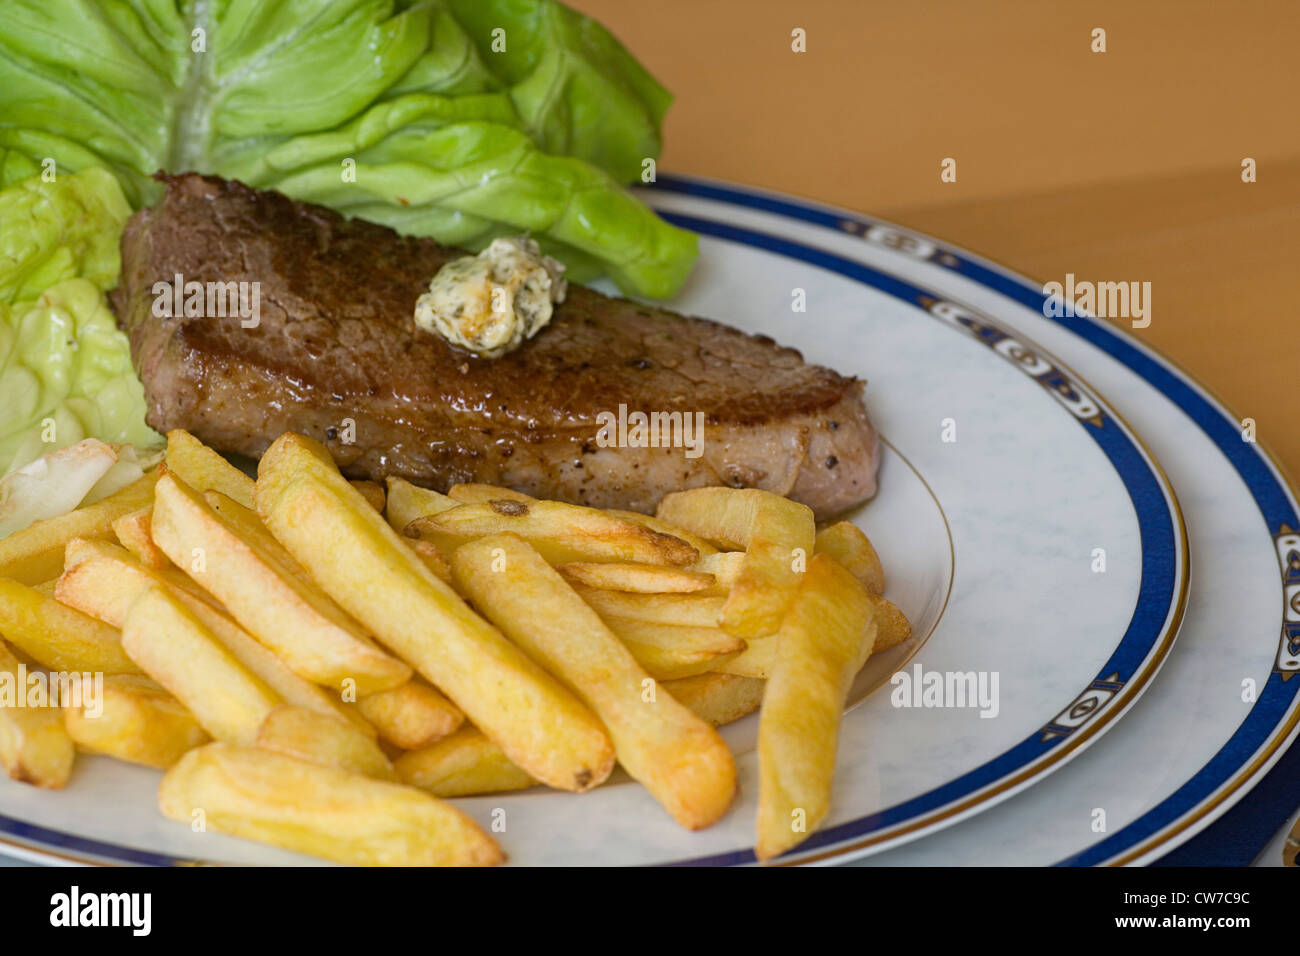 Steak with chips Stock Photo